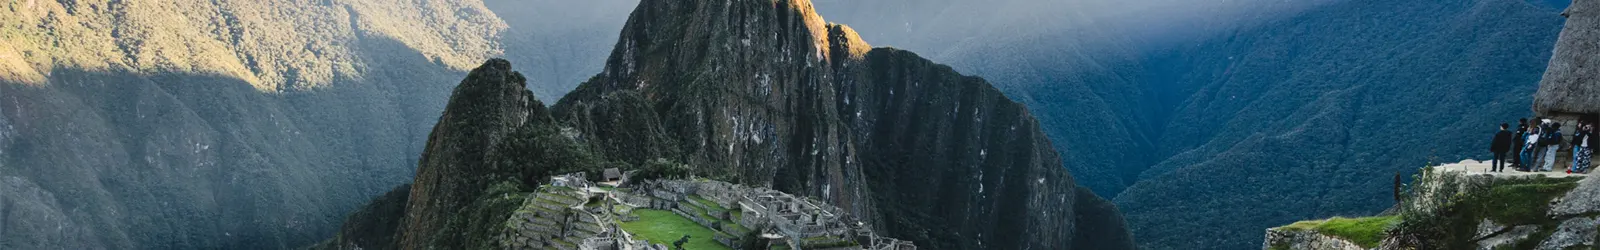 BREAKING NEWS RULES OF VISIT TO MACHU PICCHU